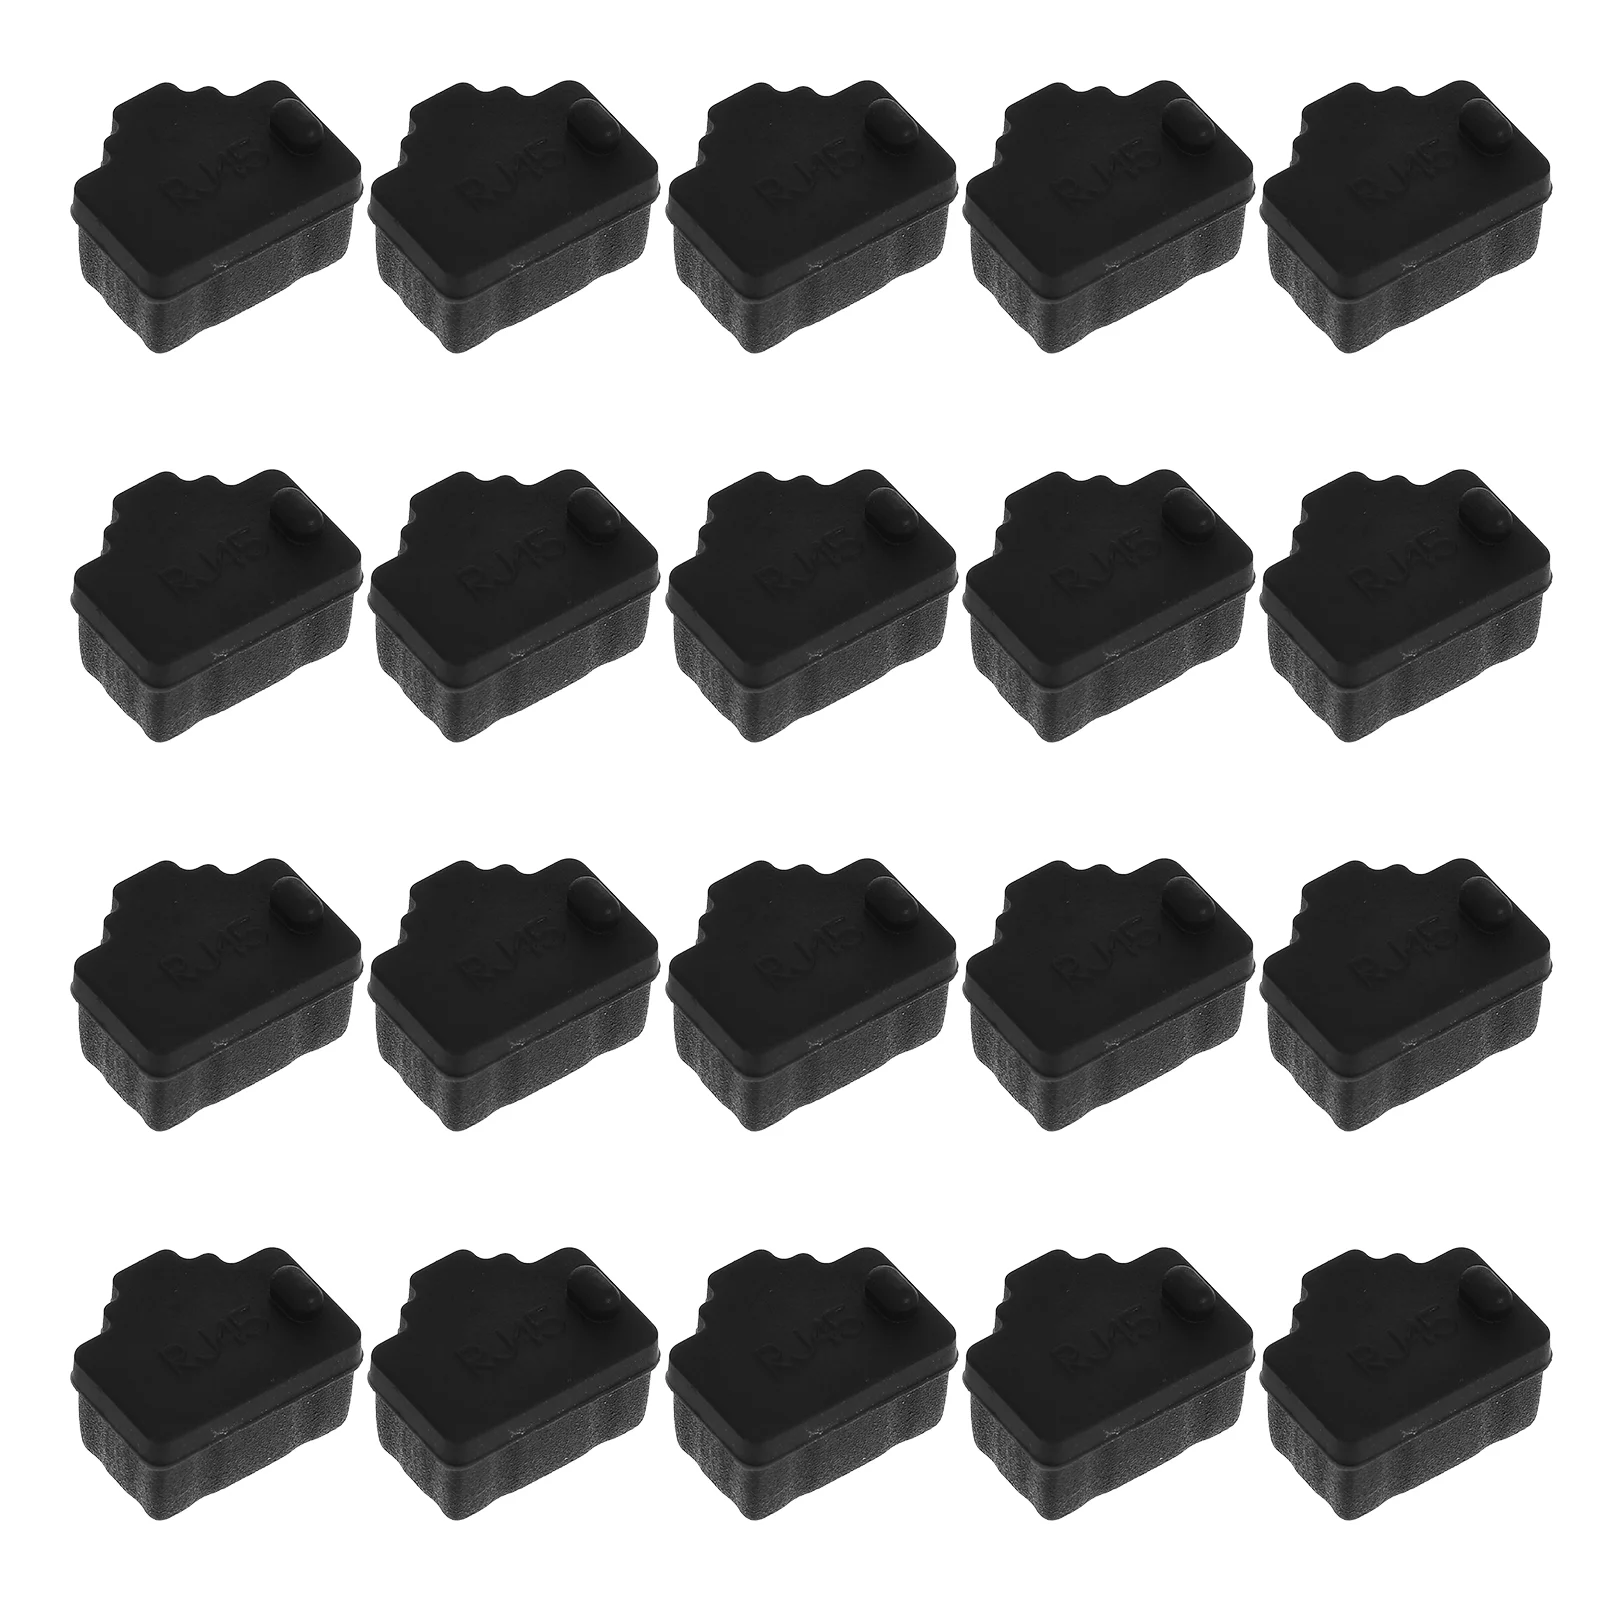 

20 Pcs Dust-proof Plug Ethernet Hub Interface Caps Silica Gel Network Stoppers